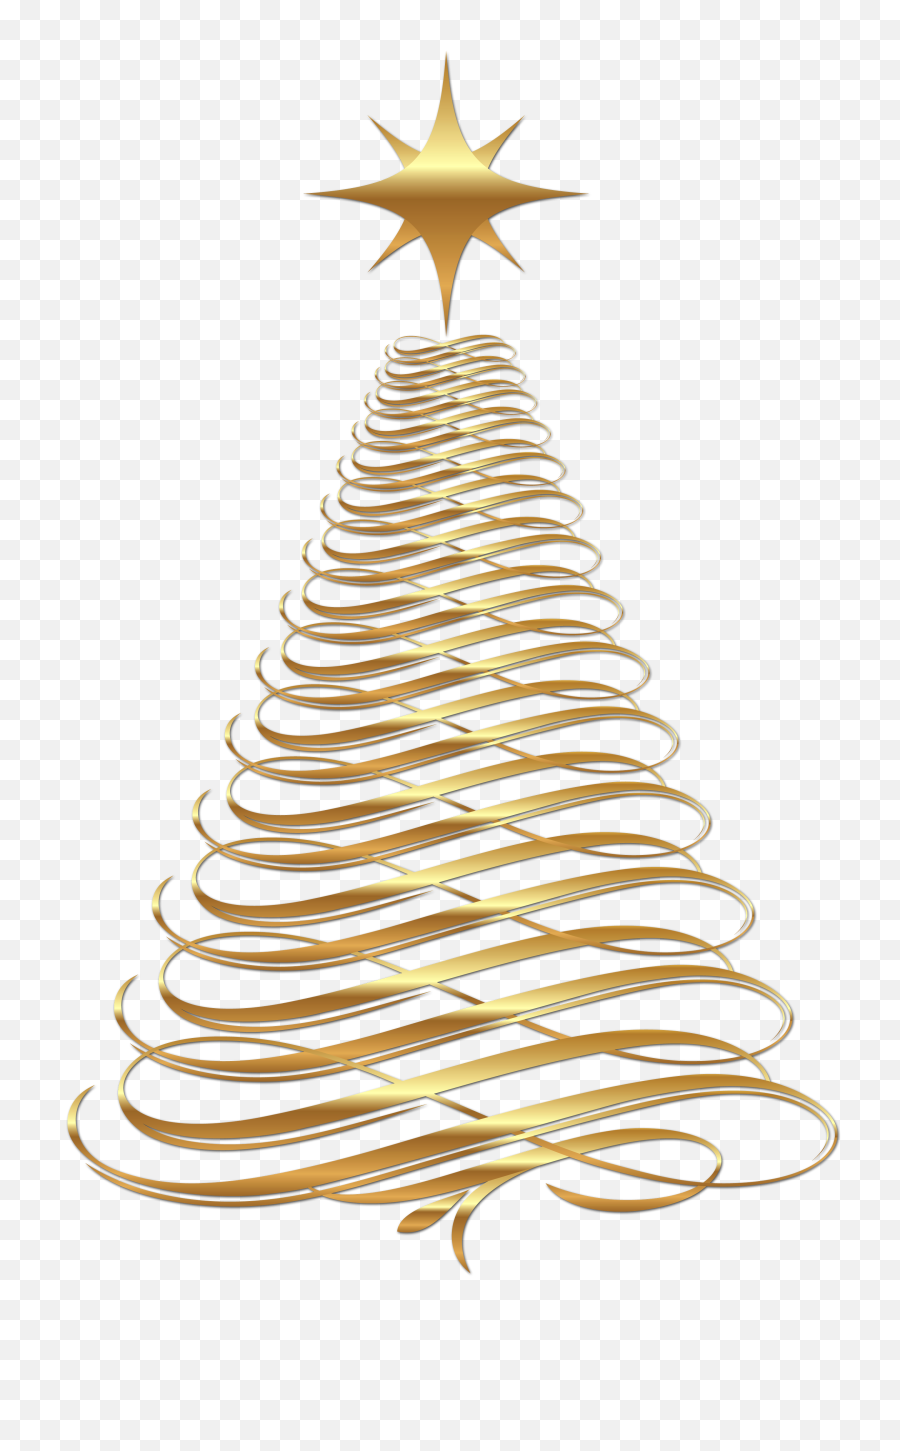 Download Image Result For Christmas Transparent Background - Golden Christmas Tree Png,Christmas Backgrounds Png